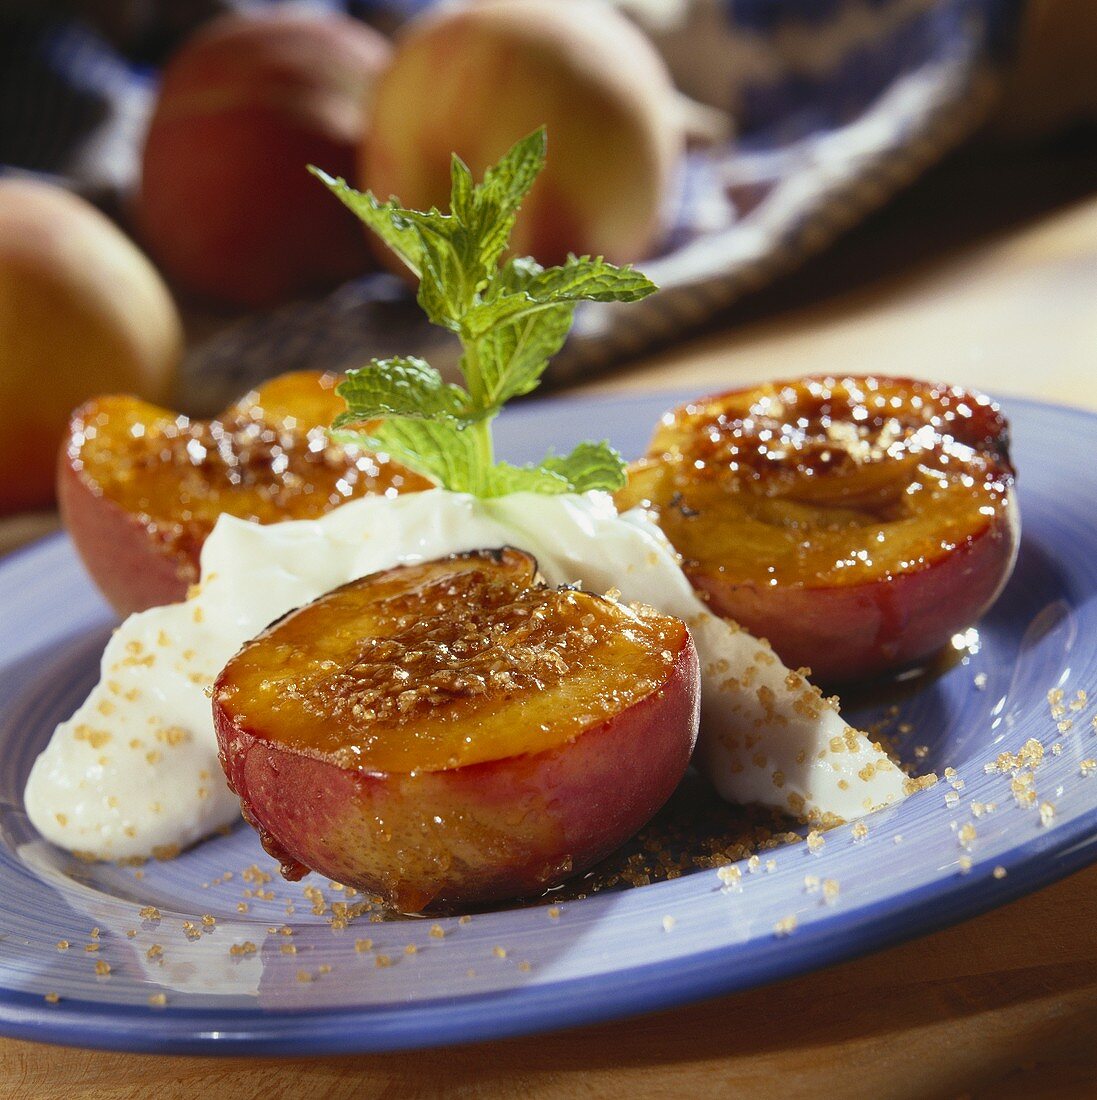 Grilled peach halves with brown sugar and cream